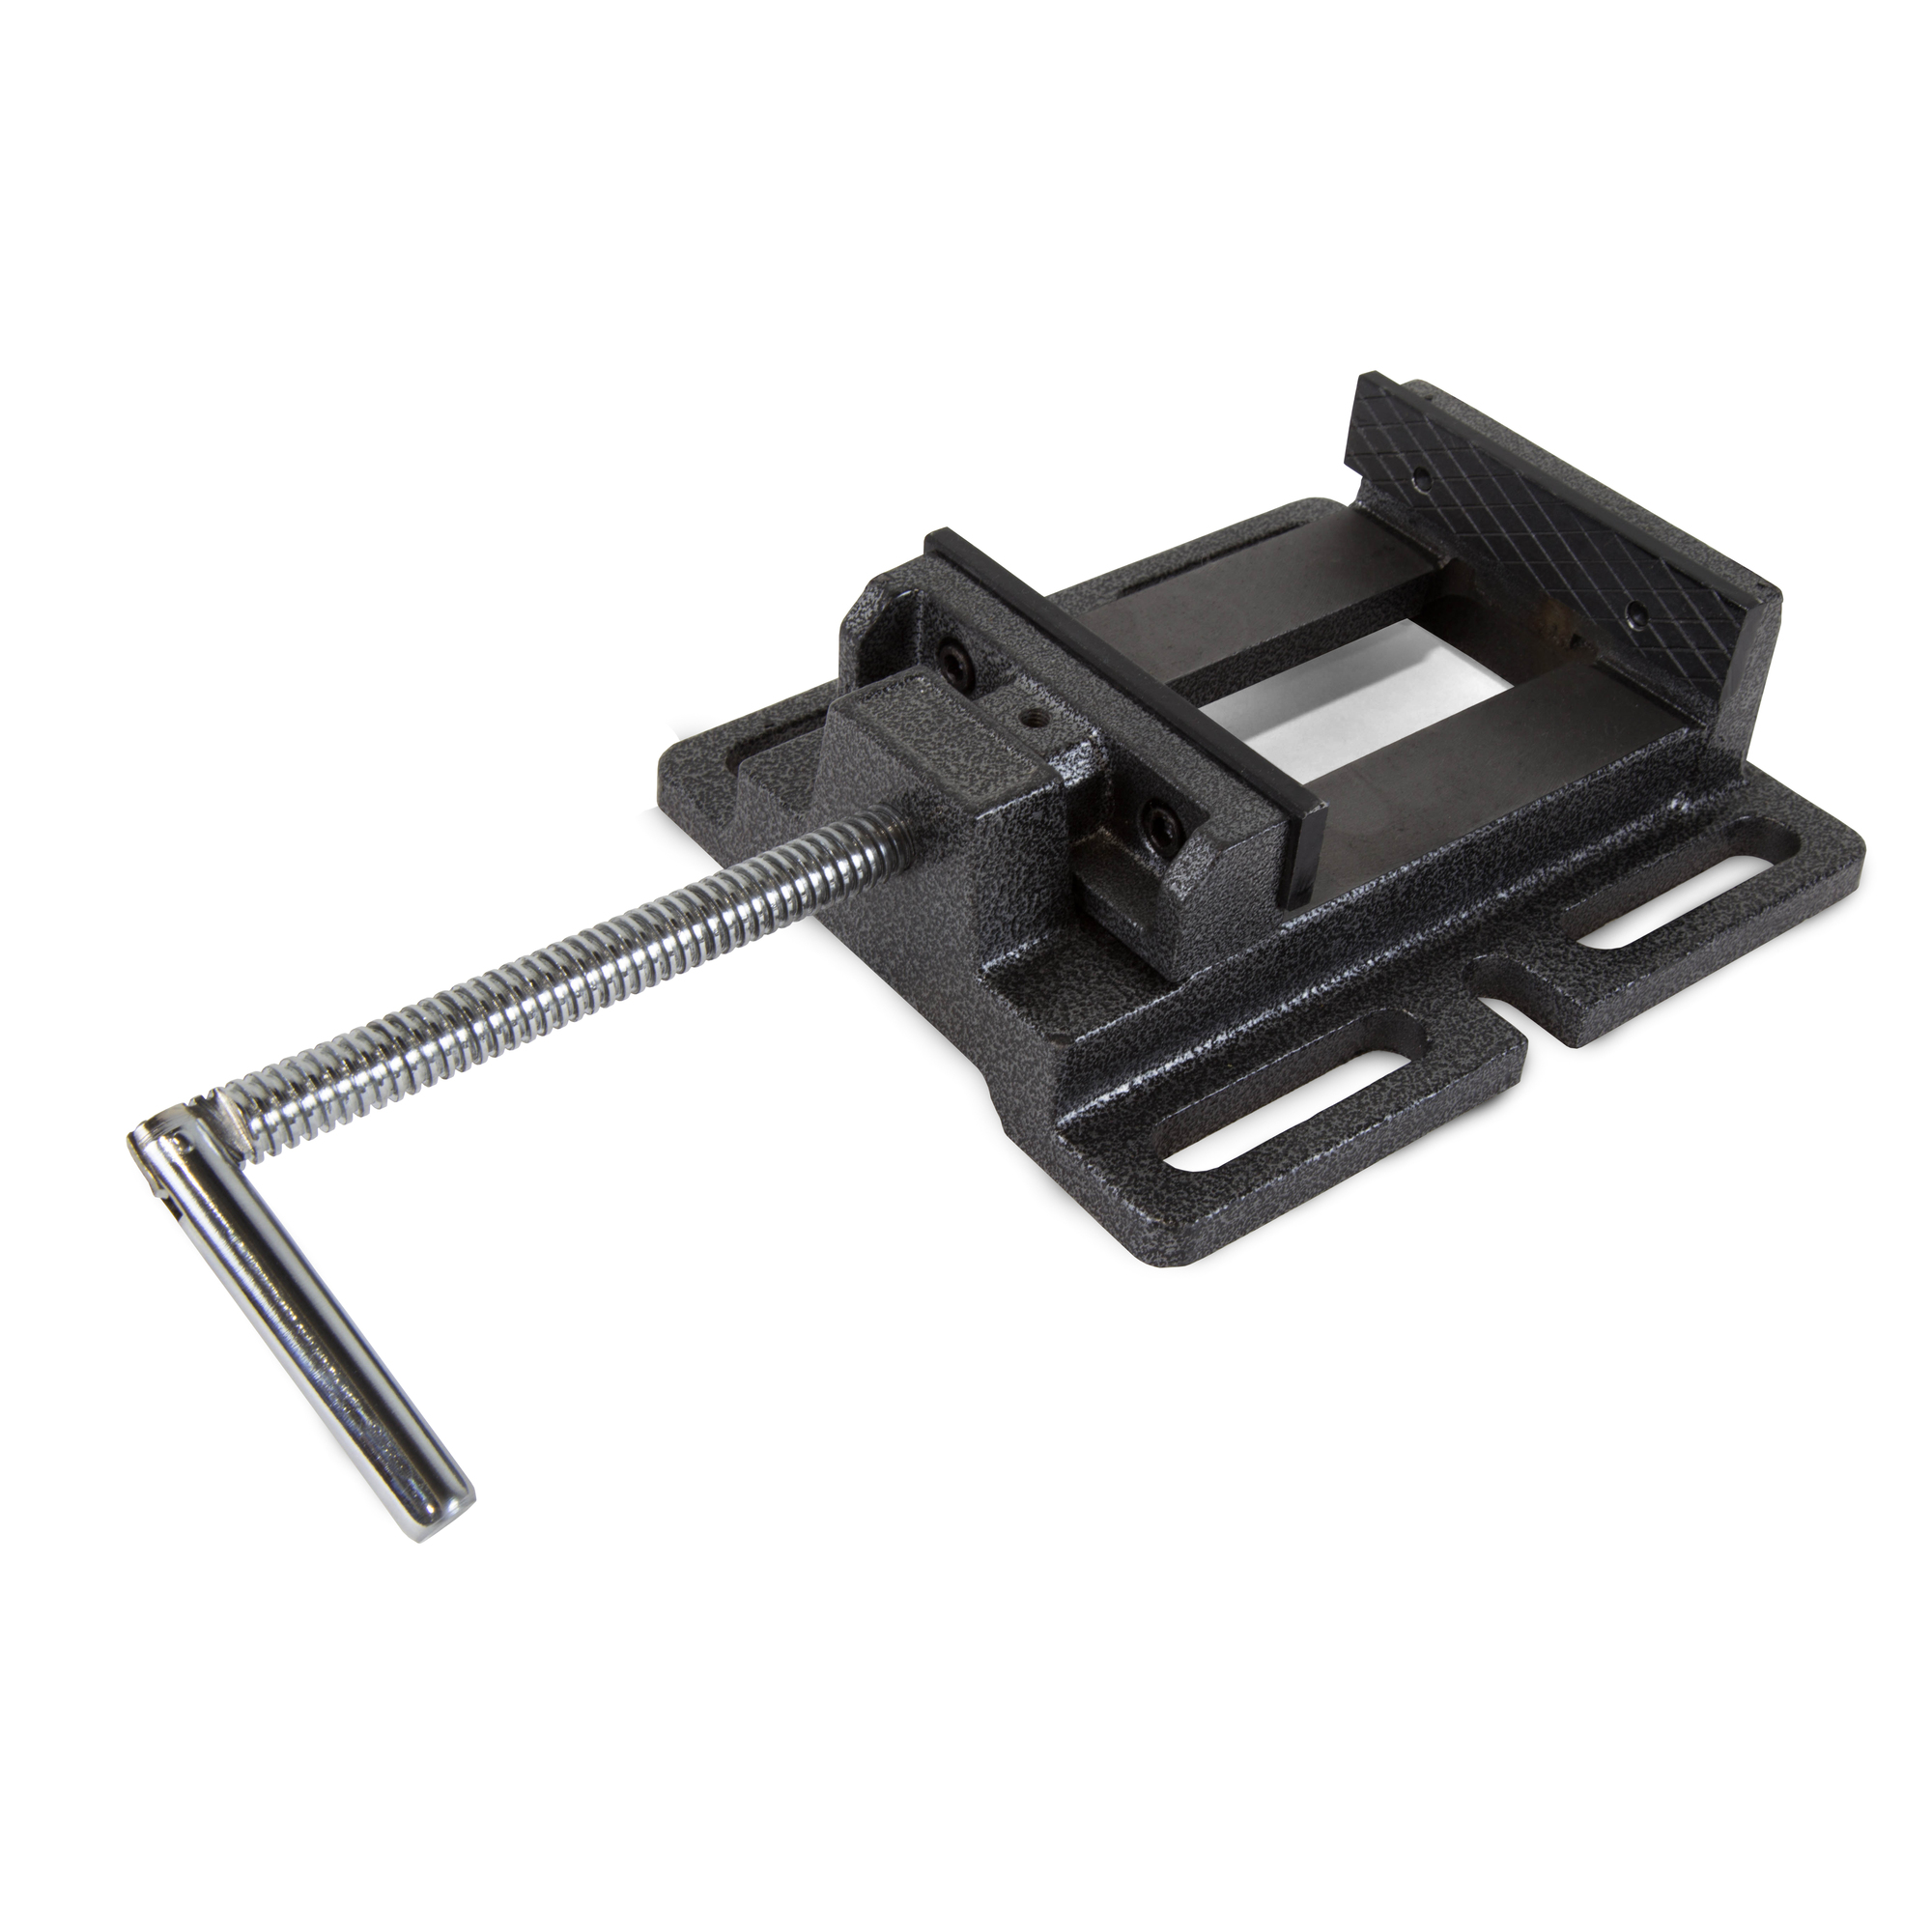 WEN, 4Inch Drill Press Vise, Jaw Width 4 in, Jaw Capacity 4 in, Material Cast Iron, Model DPA424